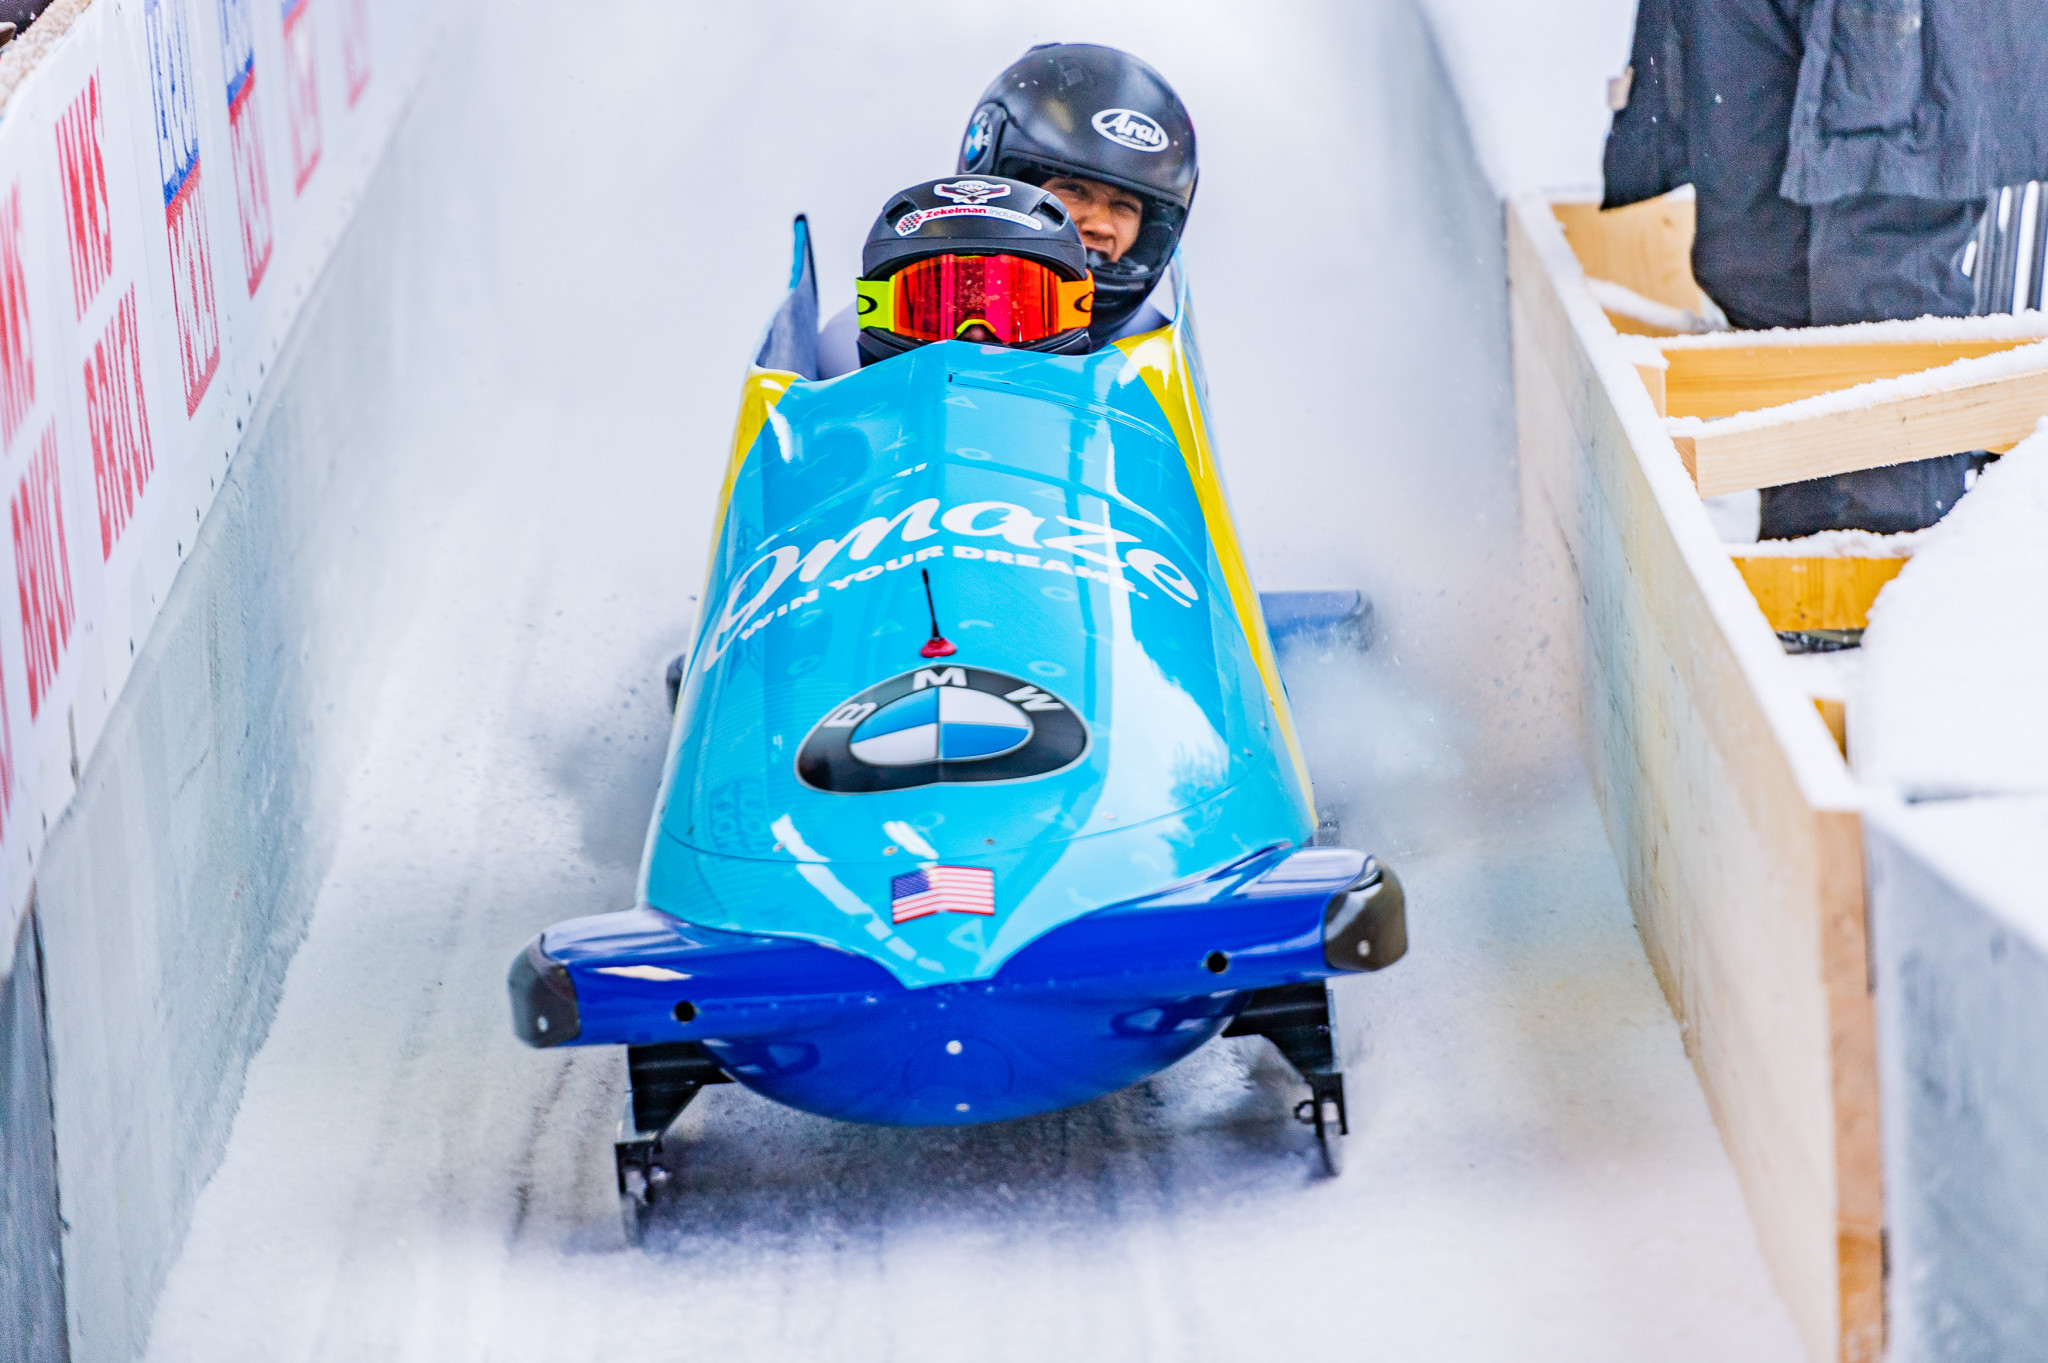 Summer and Winter Olympian Jones returns to US bobsleigh squad